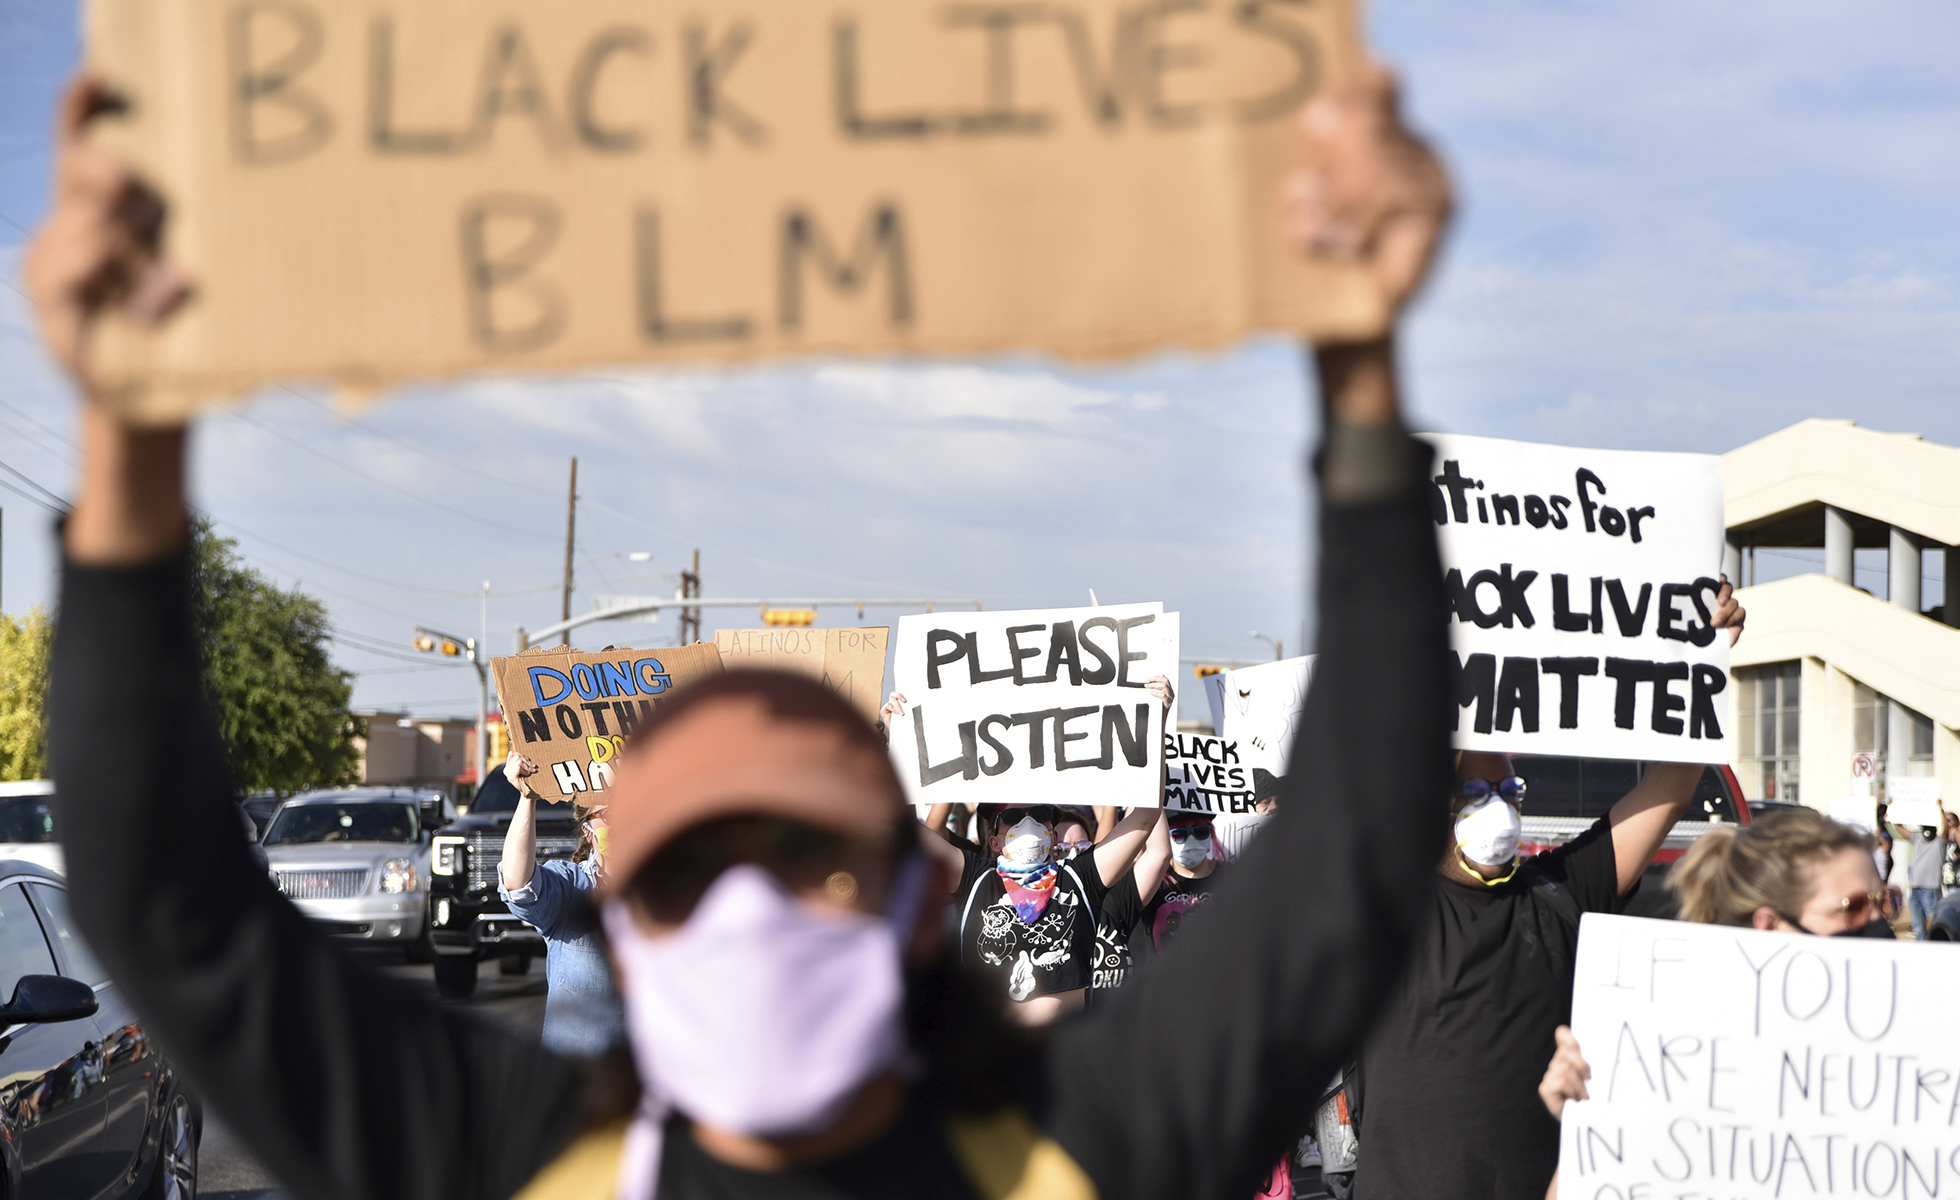 Protesters swarm the turn lane on 8th Street after a cop car stopped to deploy traffic cones to block traffic from turning onto Grant Avenue during a Black Lives Matter Protest in Odessa, TX on Sunday, May 31, 2020. (Eli Hartman/Odessa American via AP)